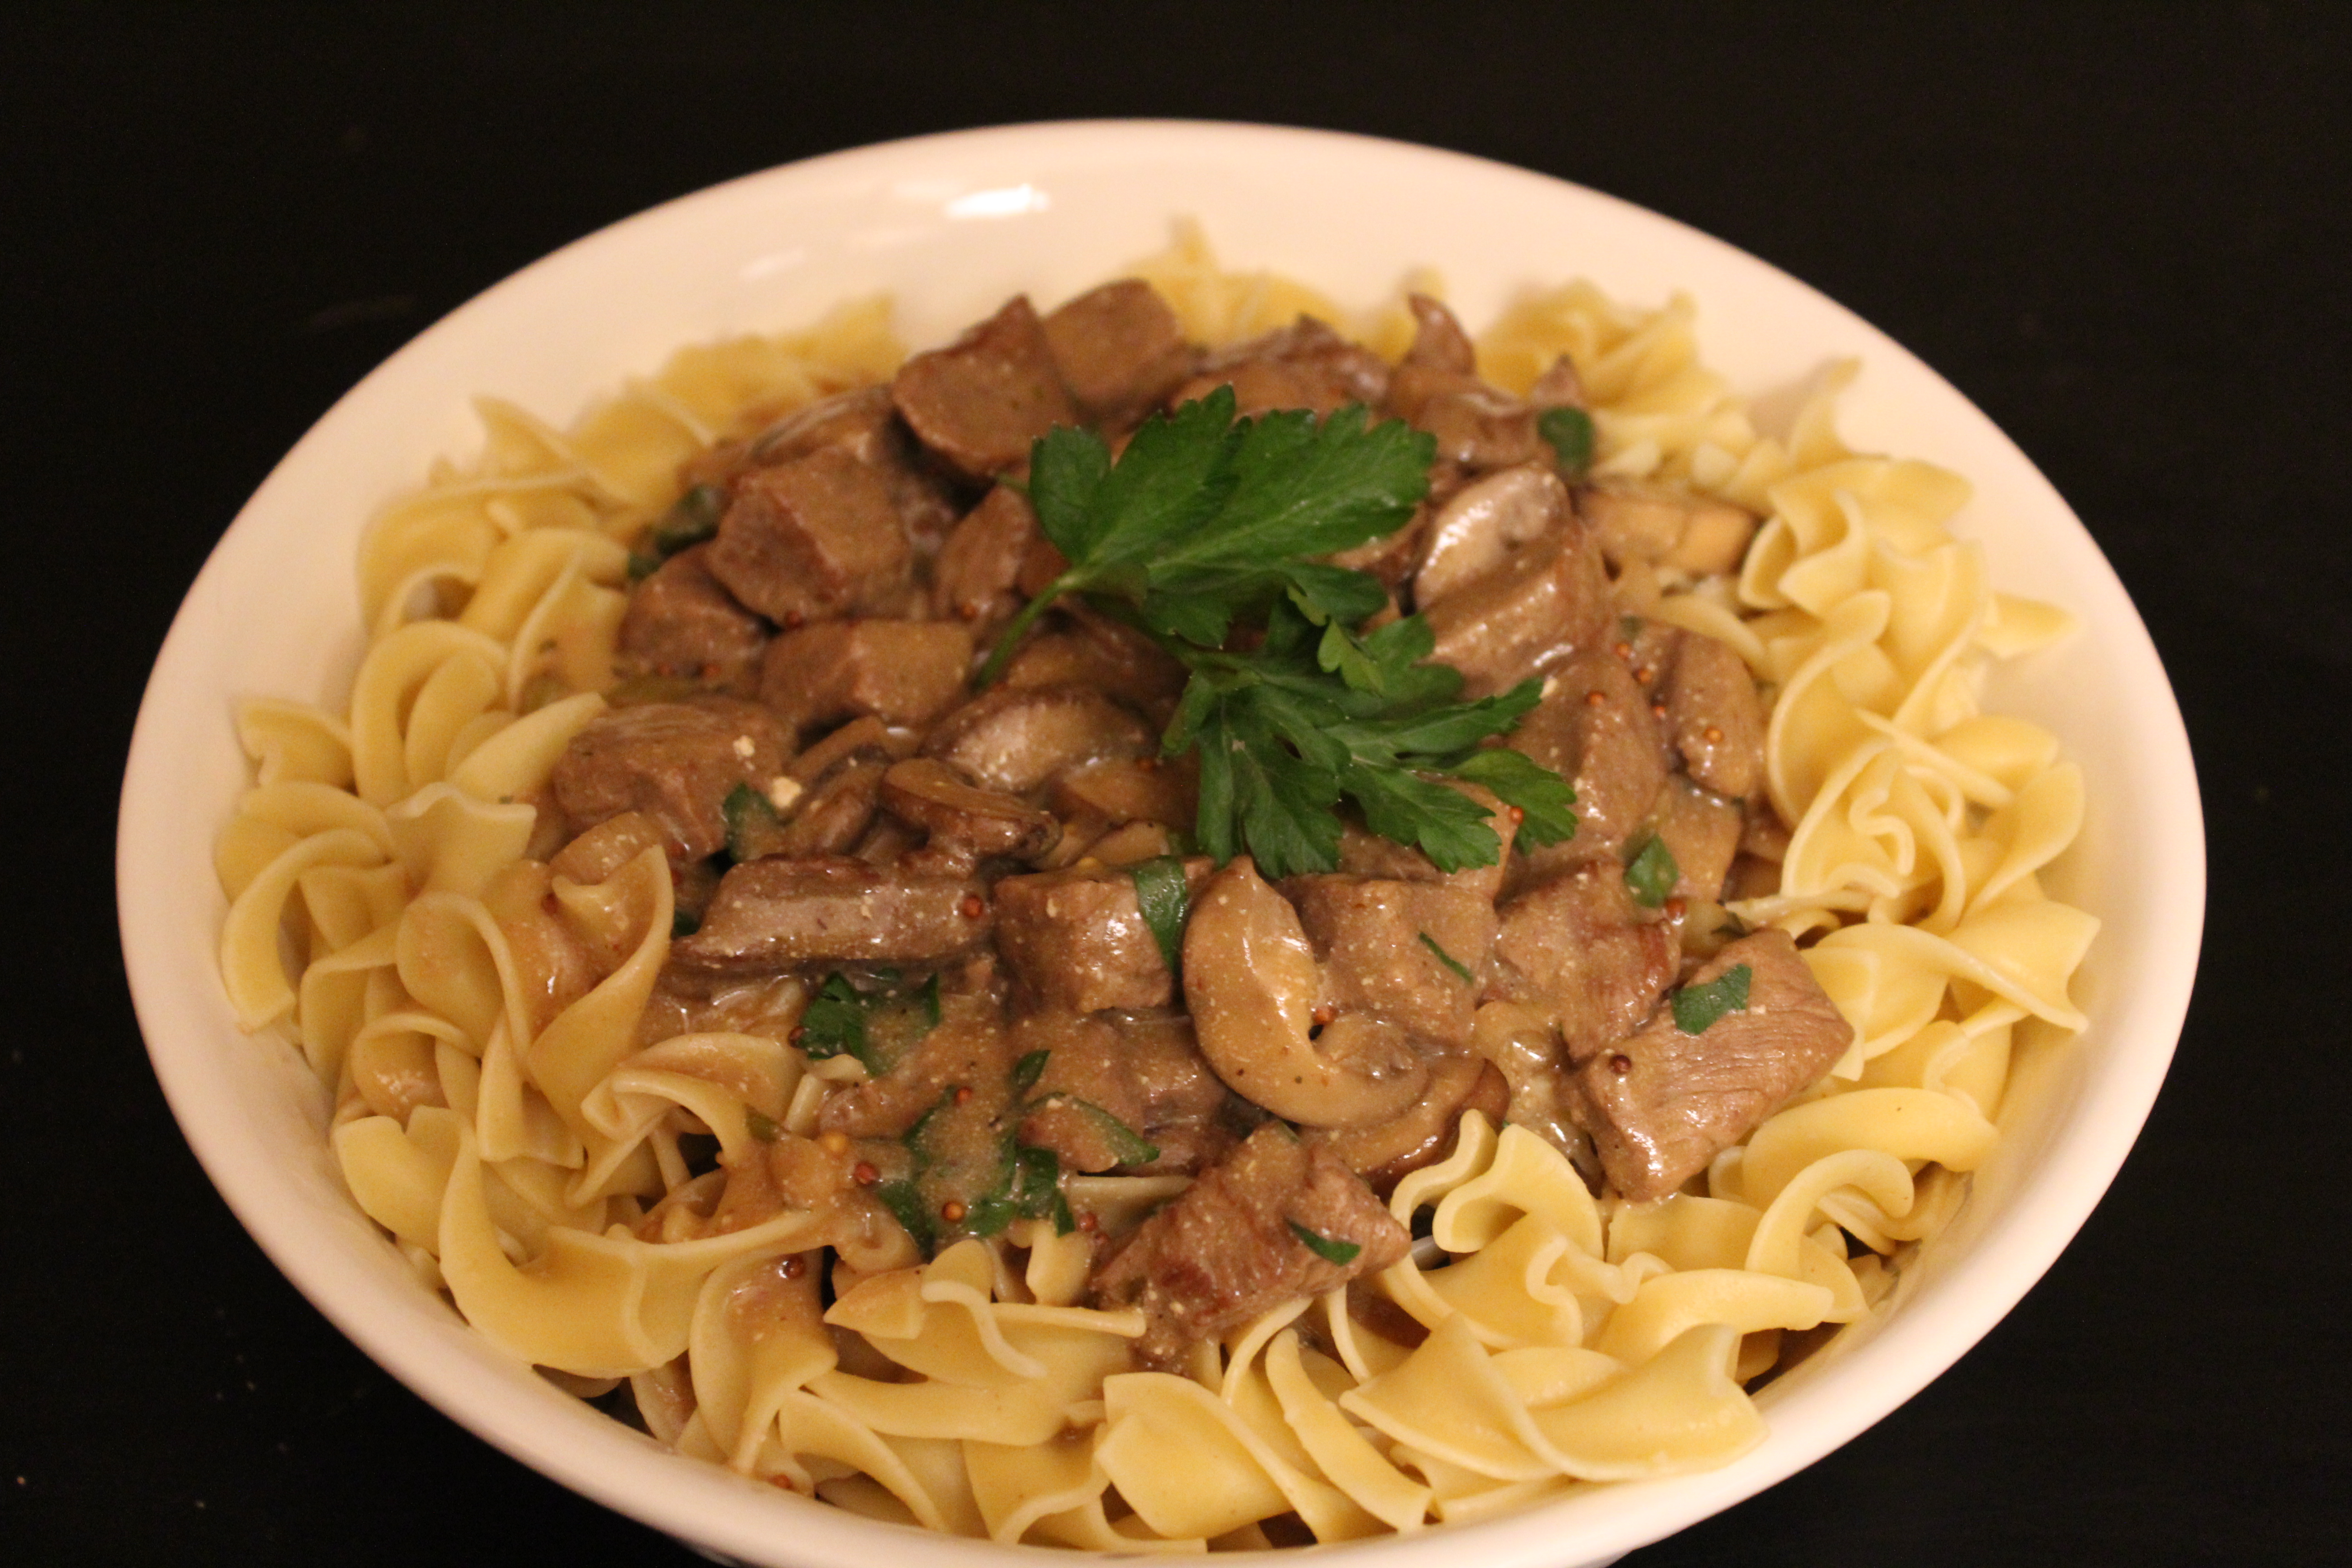 Classic Beef Stroganoff in a Slow Cooker